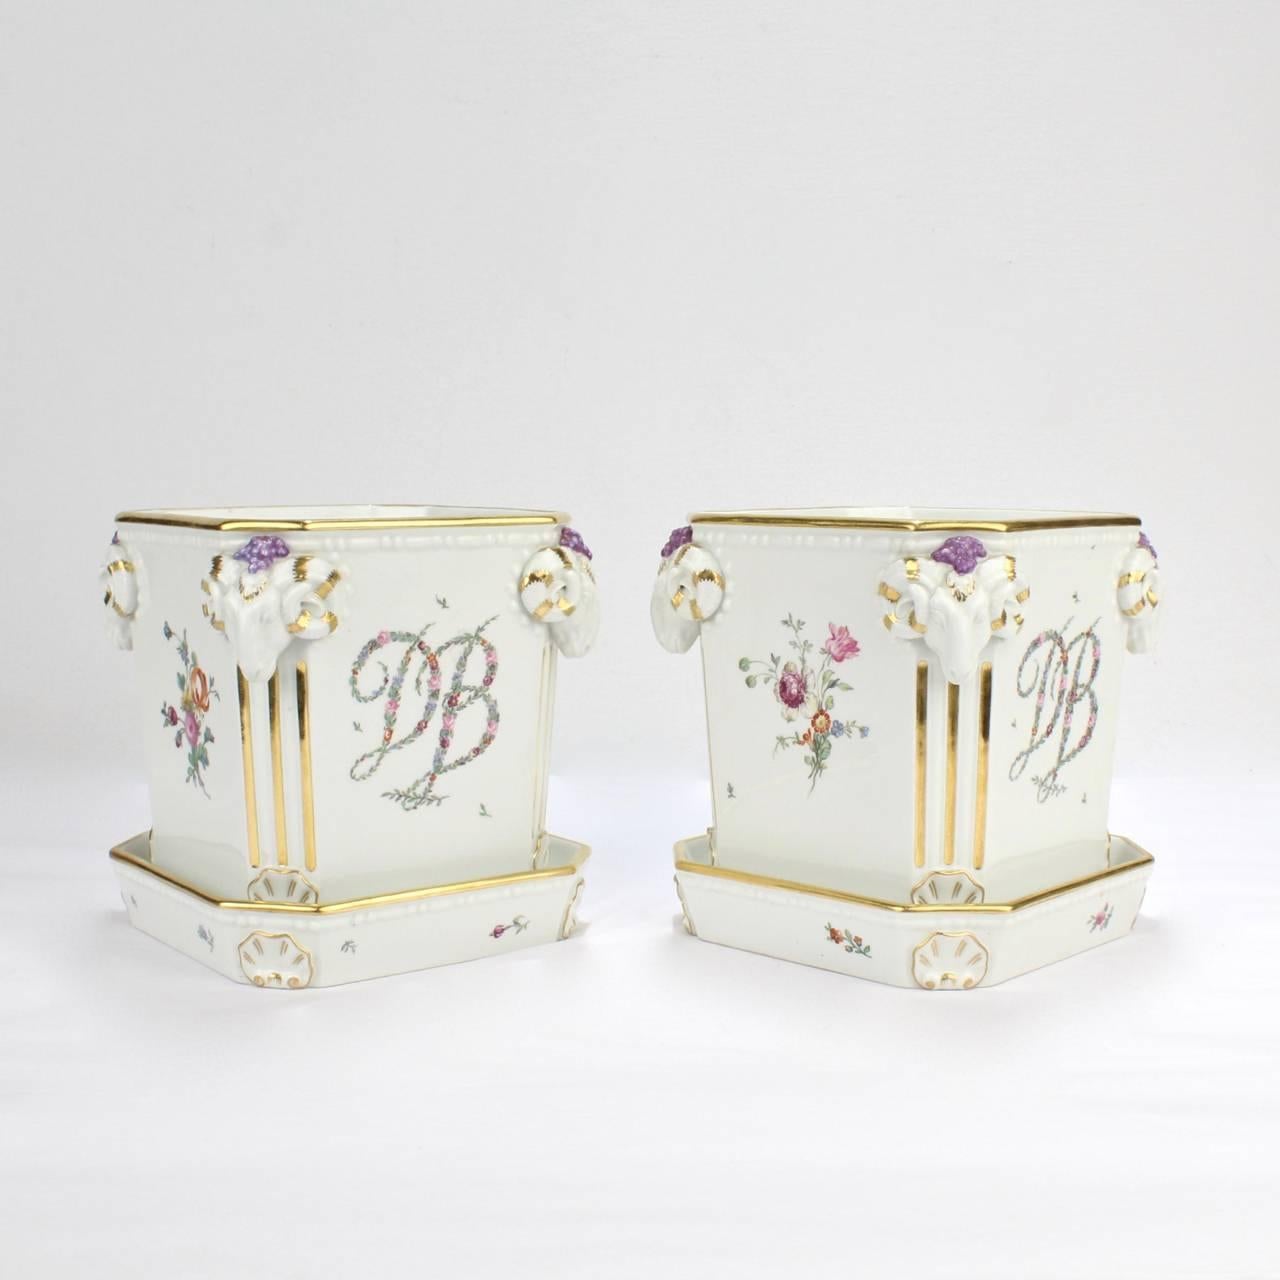 A compelling pair of vintage Royal Copenhagen porcelain cachepots or flower pots.

The pots bear the monogram DB in floral garlands to fronts (like as an homage to the royal Madame du Barry Sevres porcelain service) and Deutsche Blume style flower